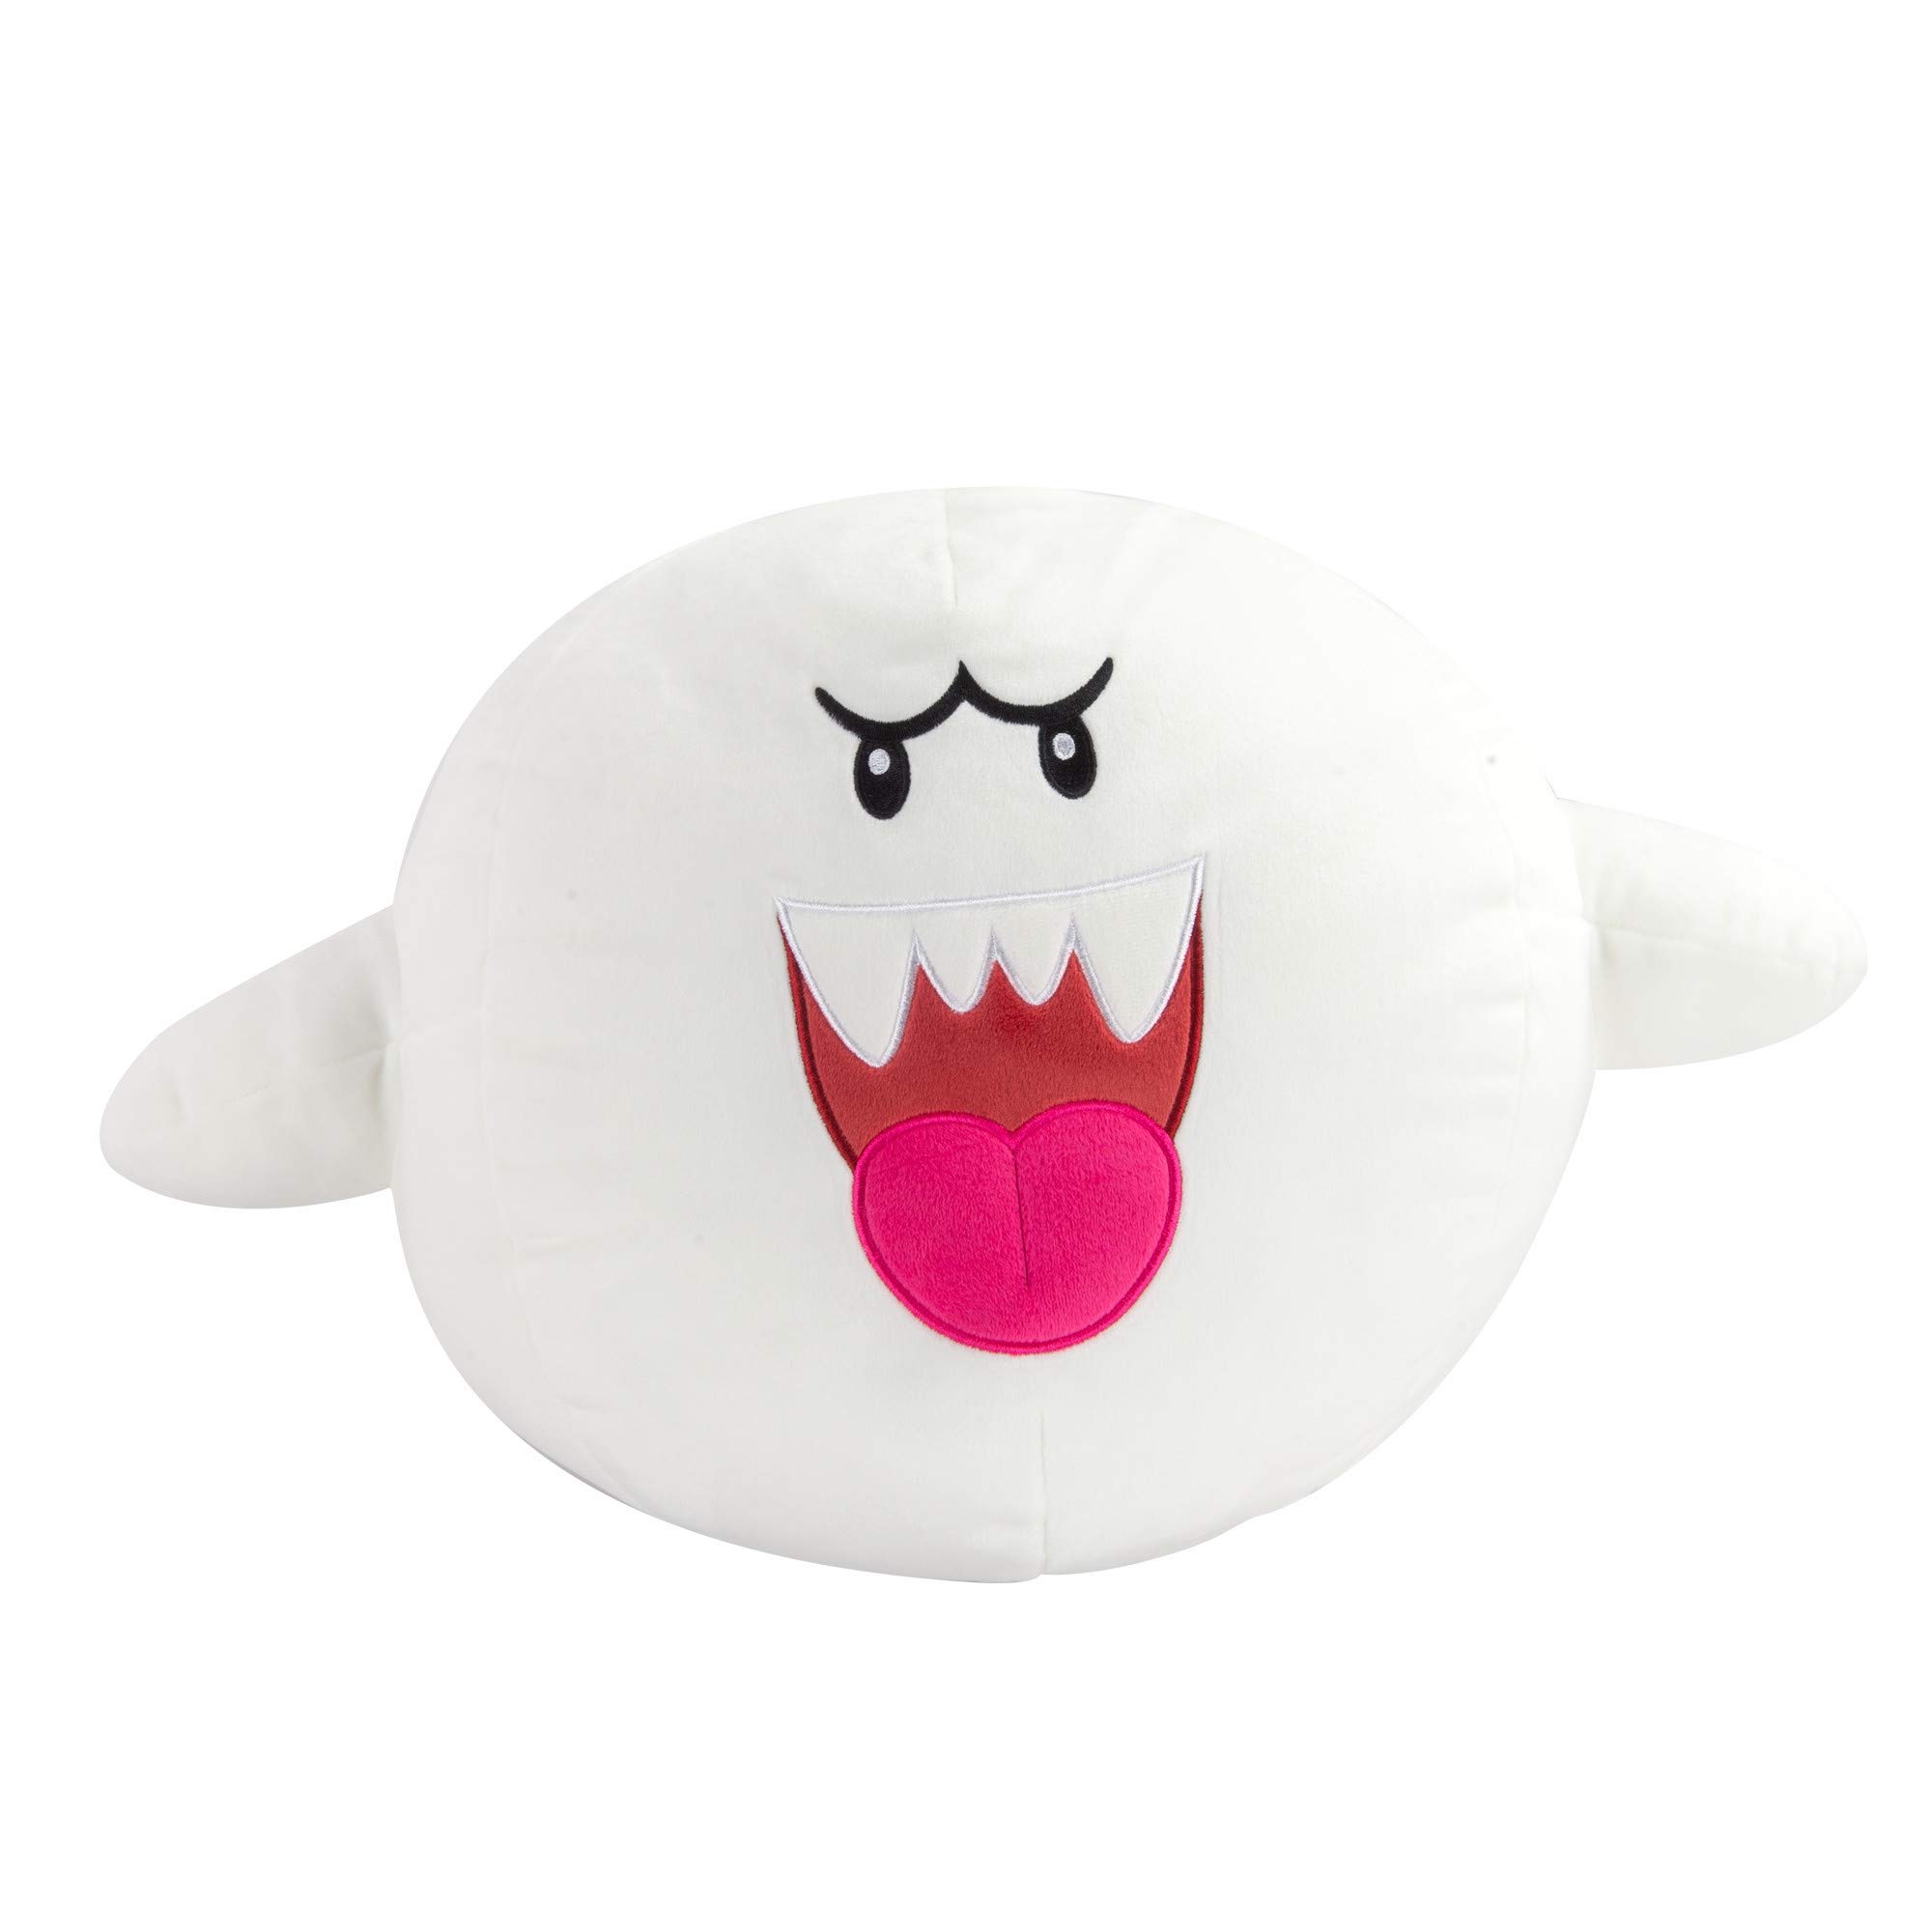 15" Club Mocchi Mocchi Super Mario Boo Plush (White, Ghost) $25.94 + Free Shipping w/ Prime or on Orders $35+